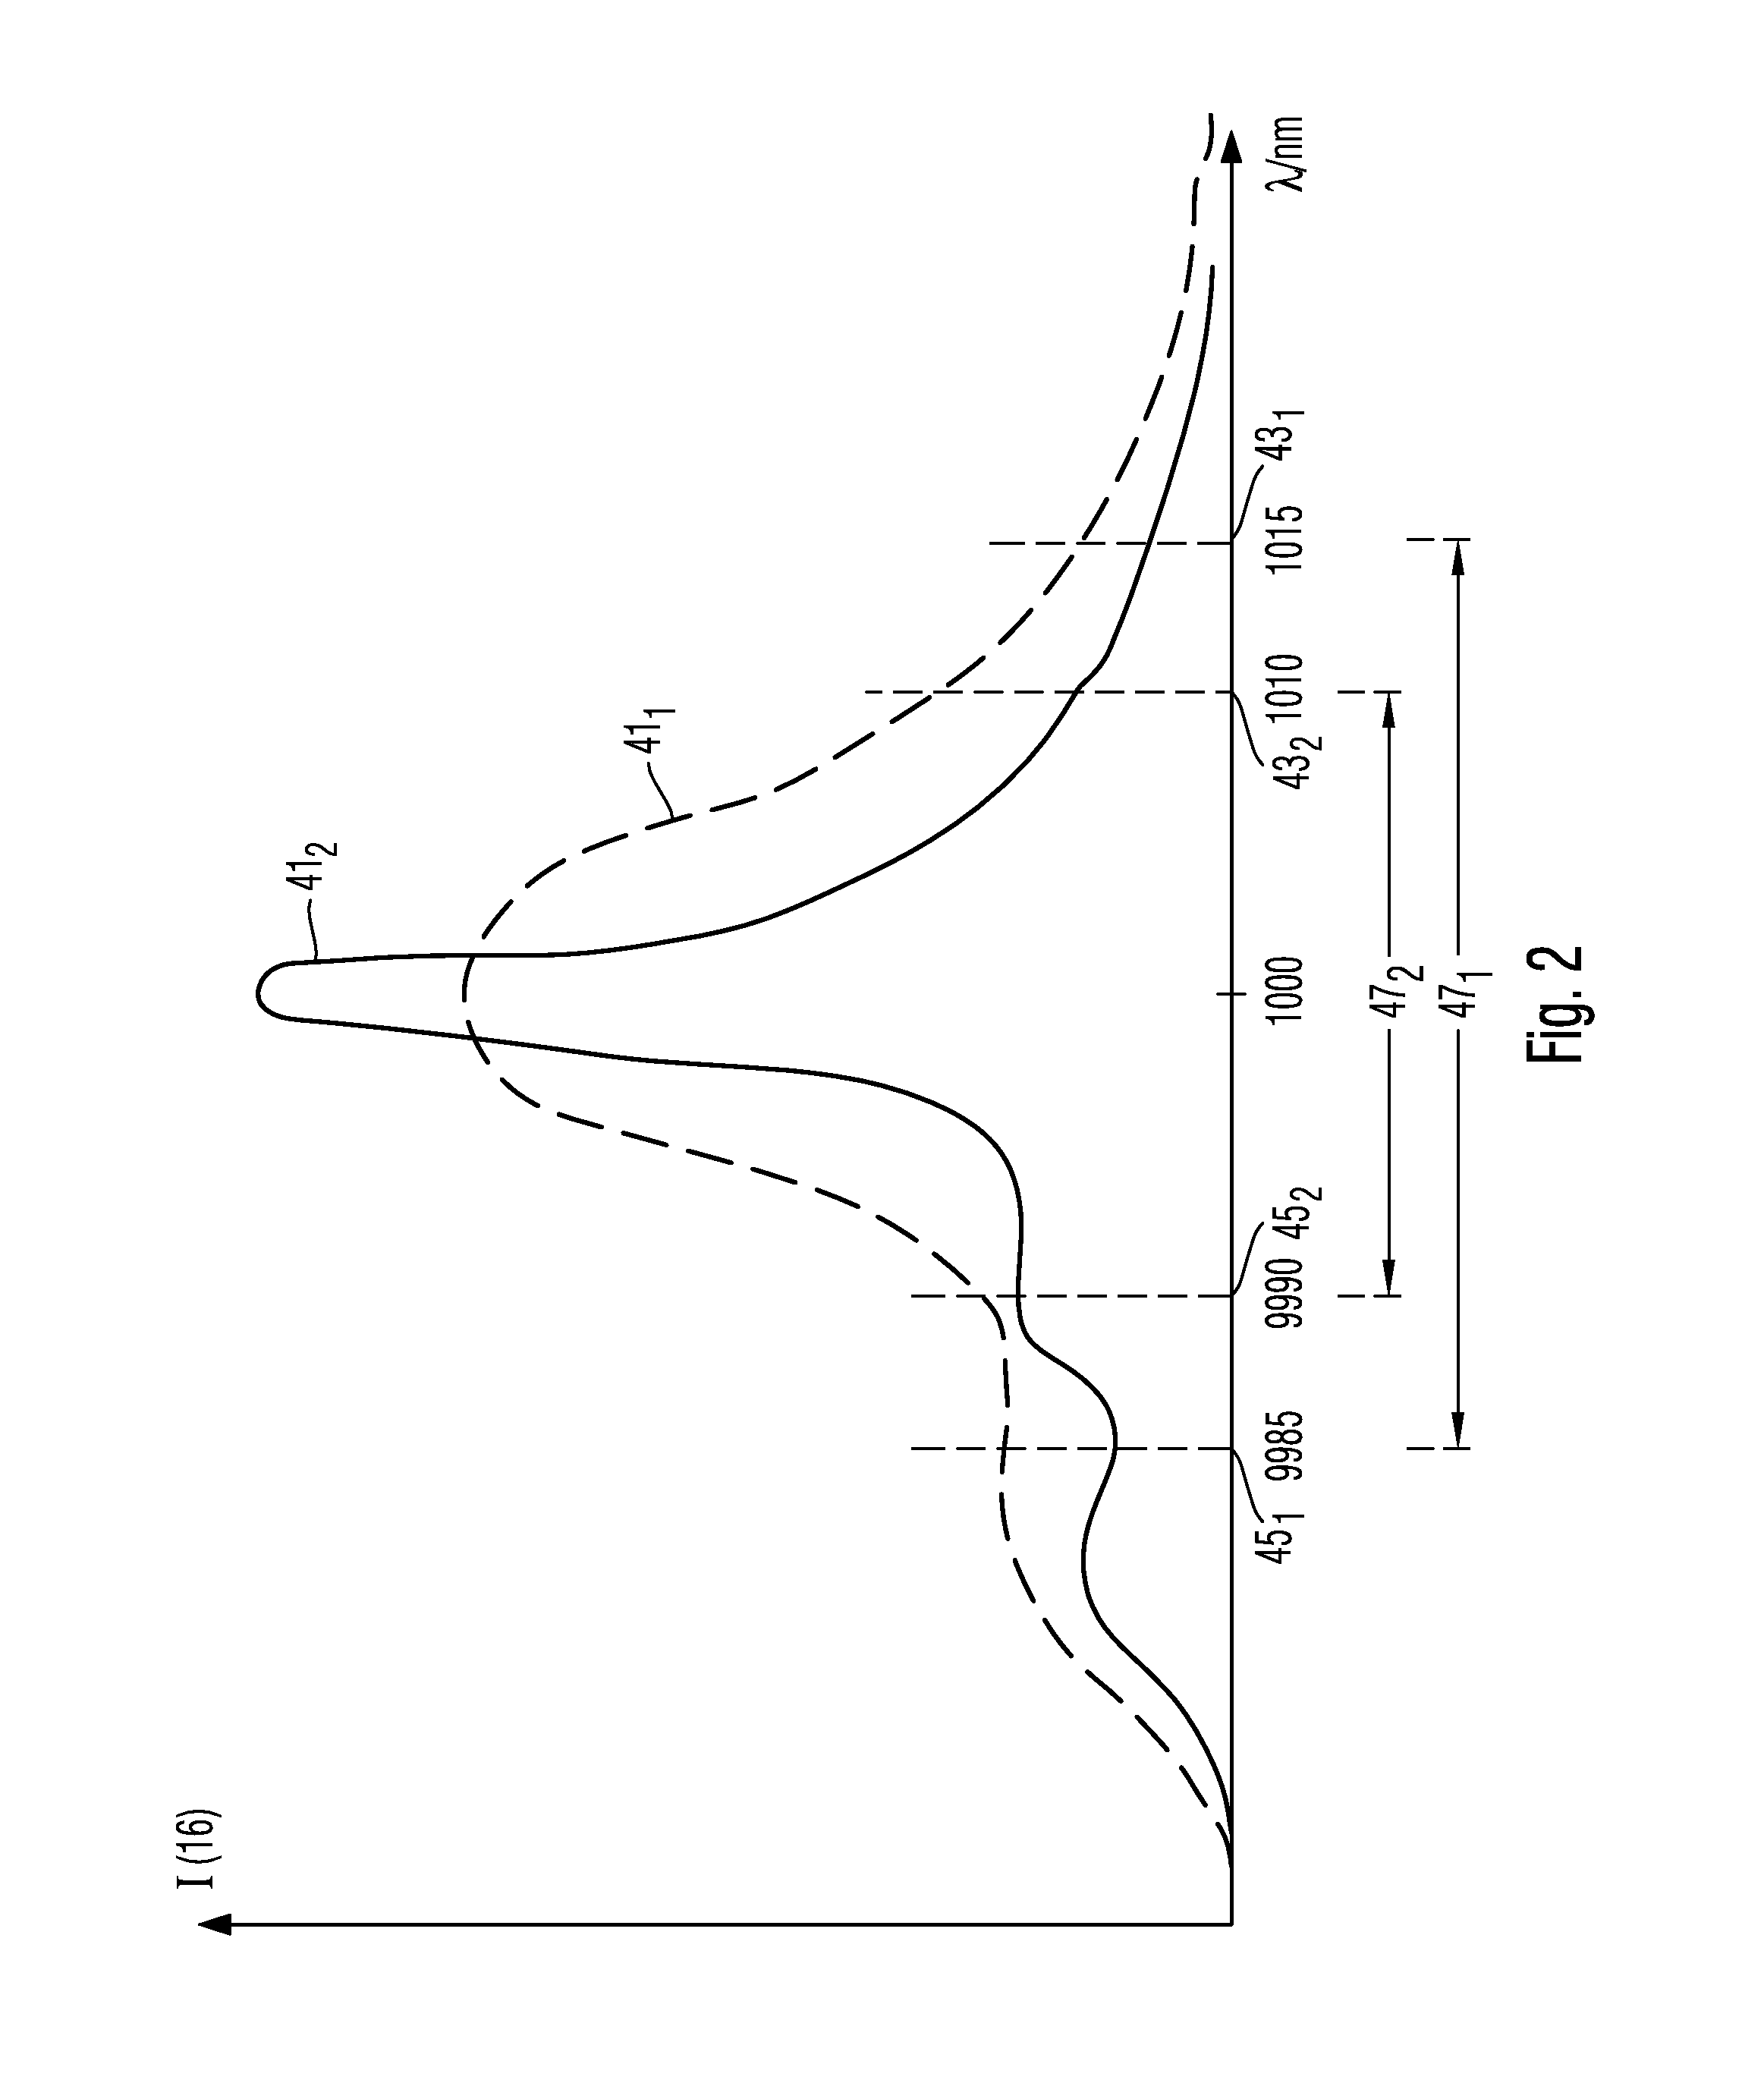 Optical Coherence Tomography Methods and Systems